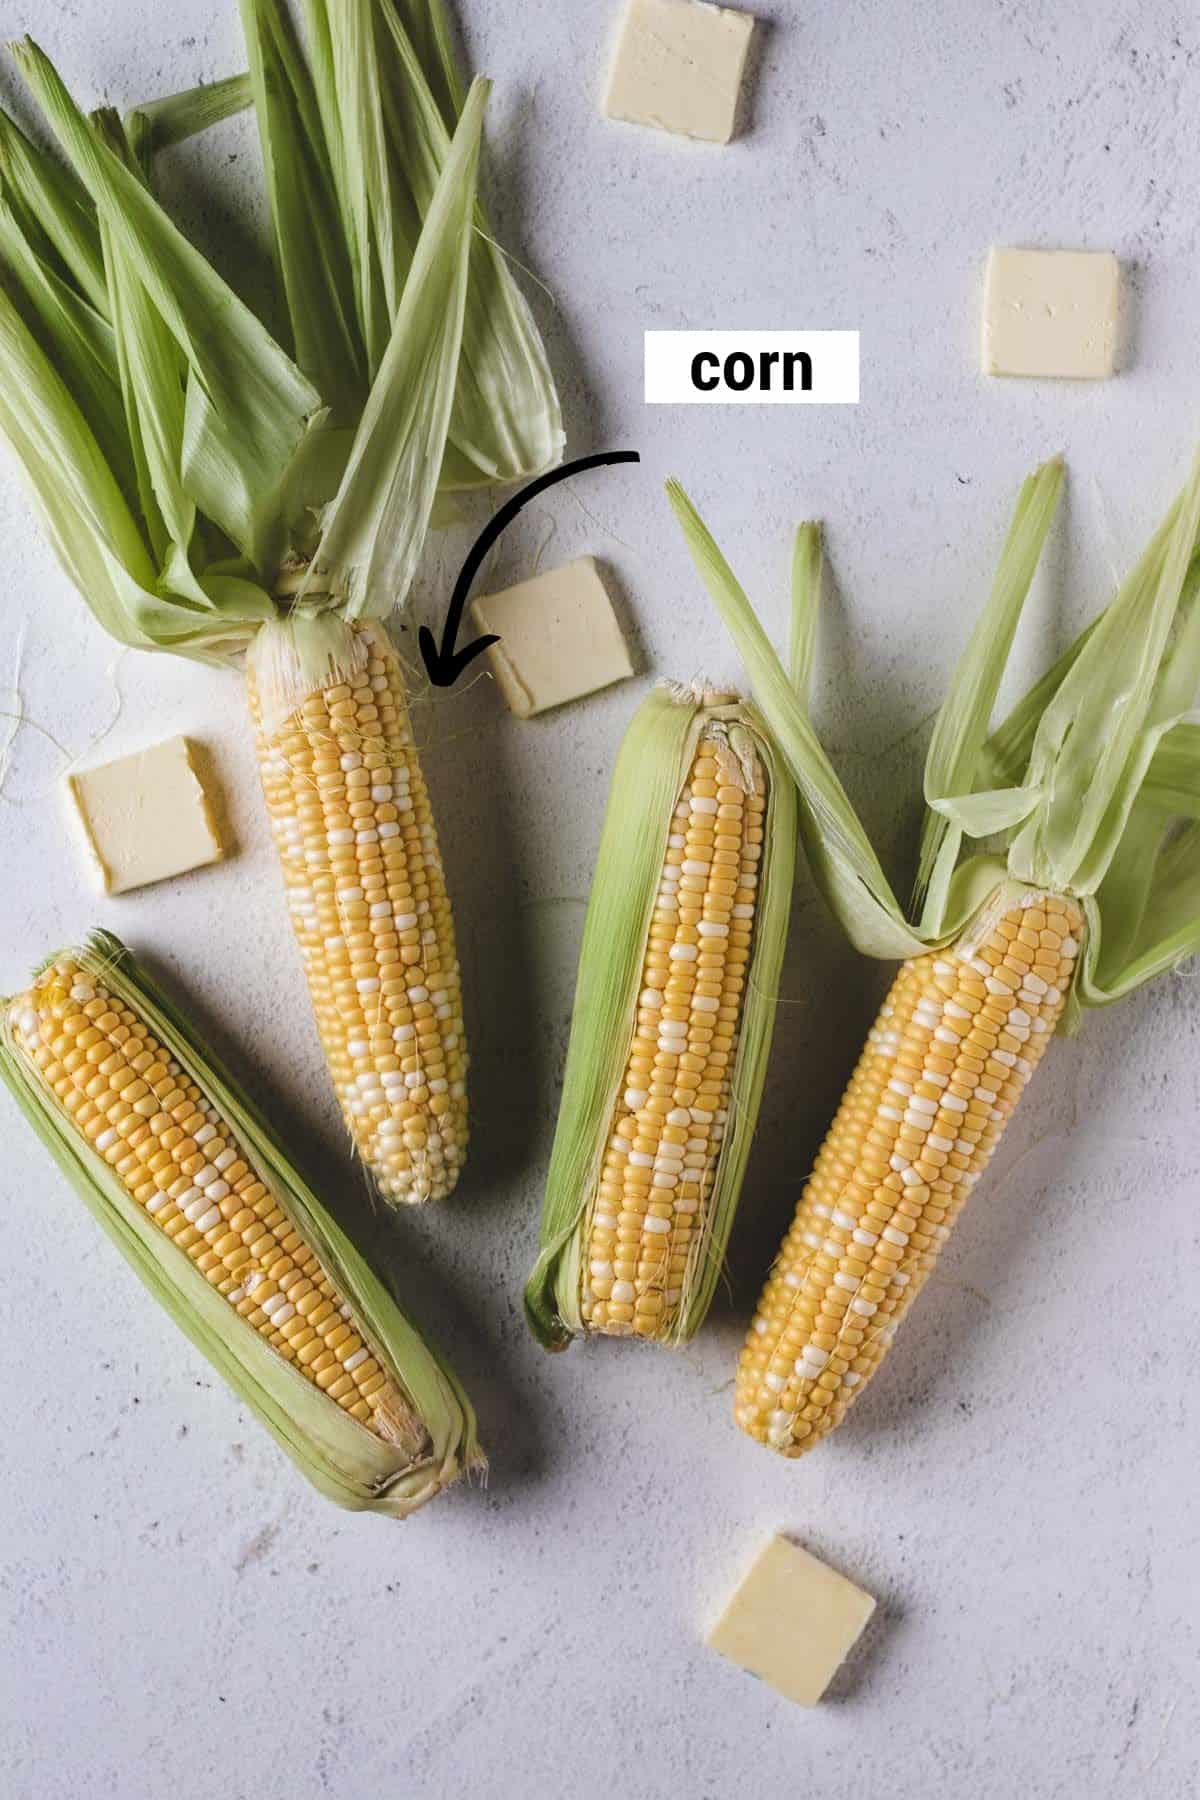 Four ears of corn with slices of butter.